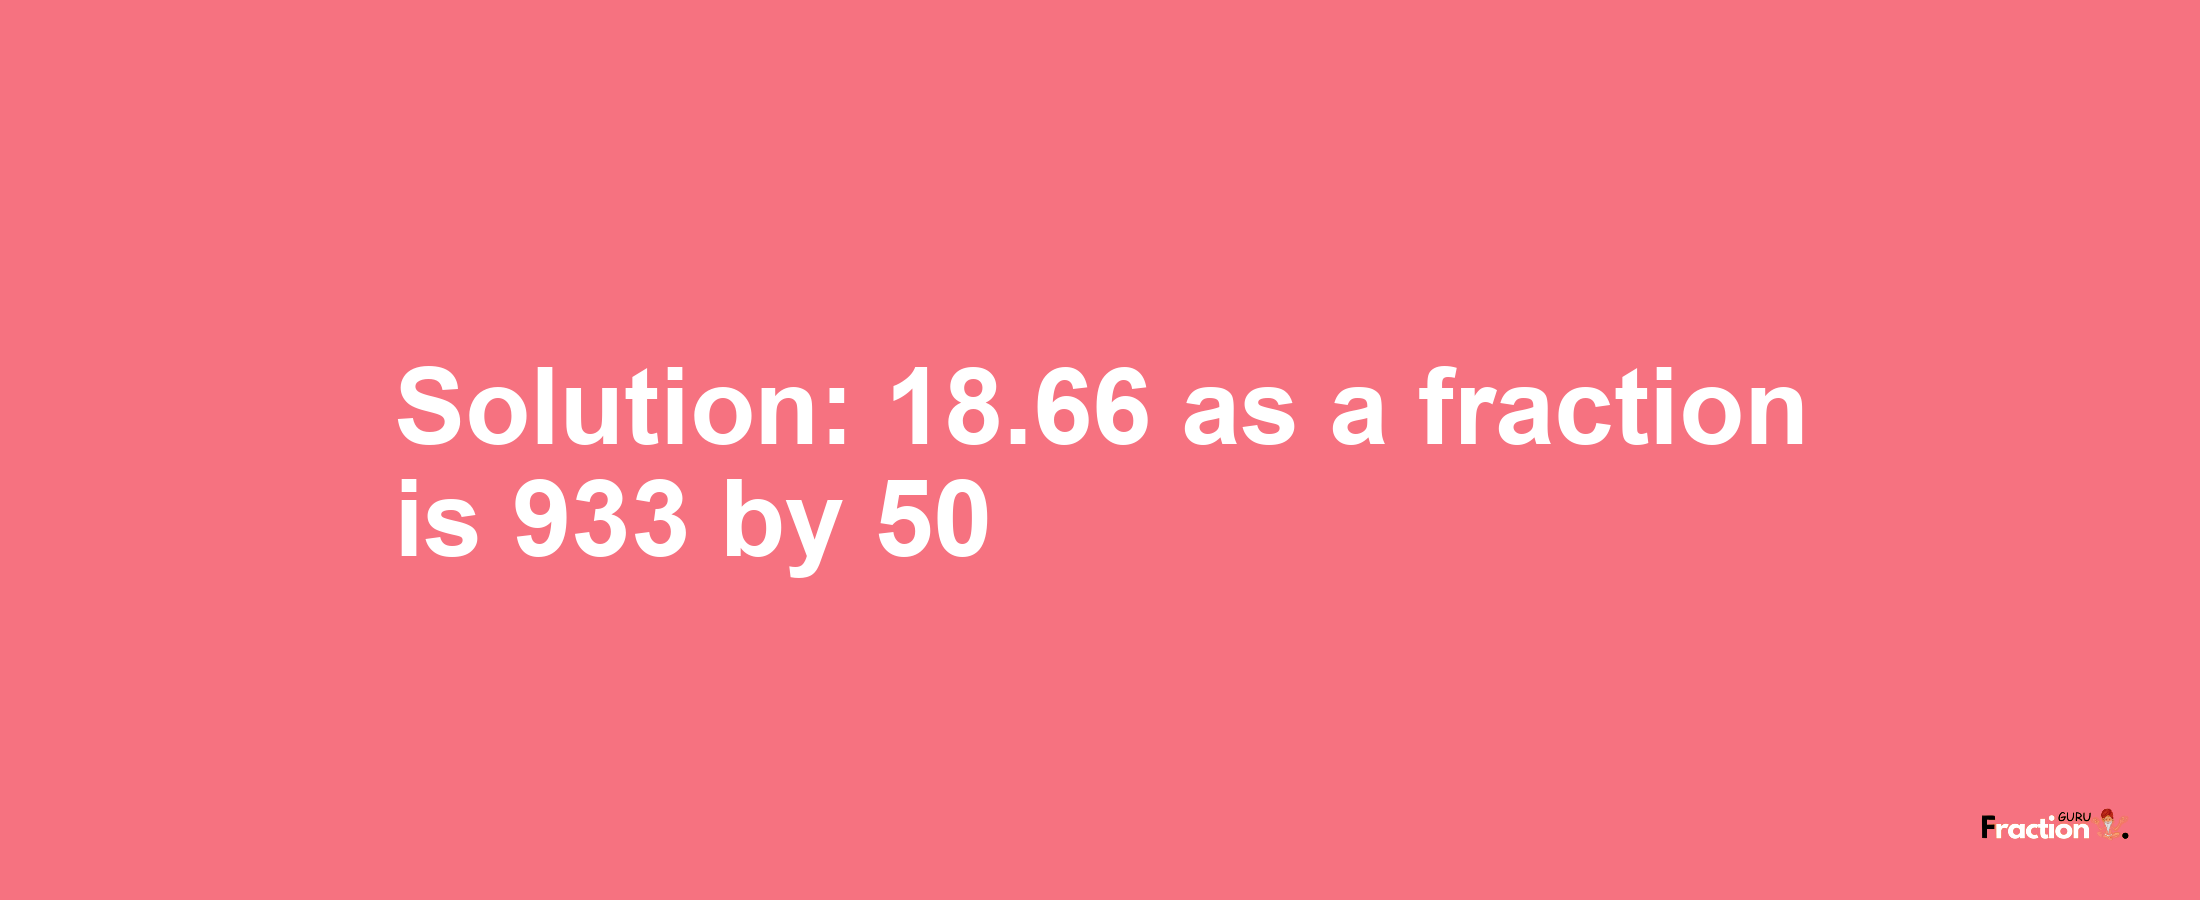 Solution:18.66 as a fraction is 933/50